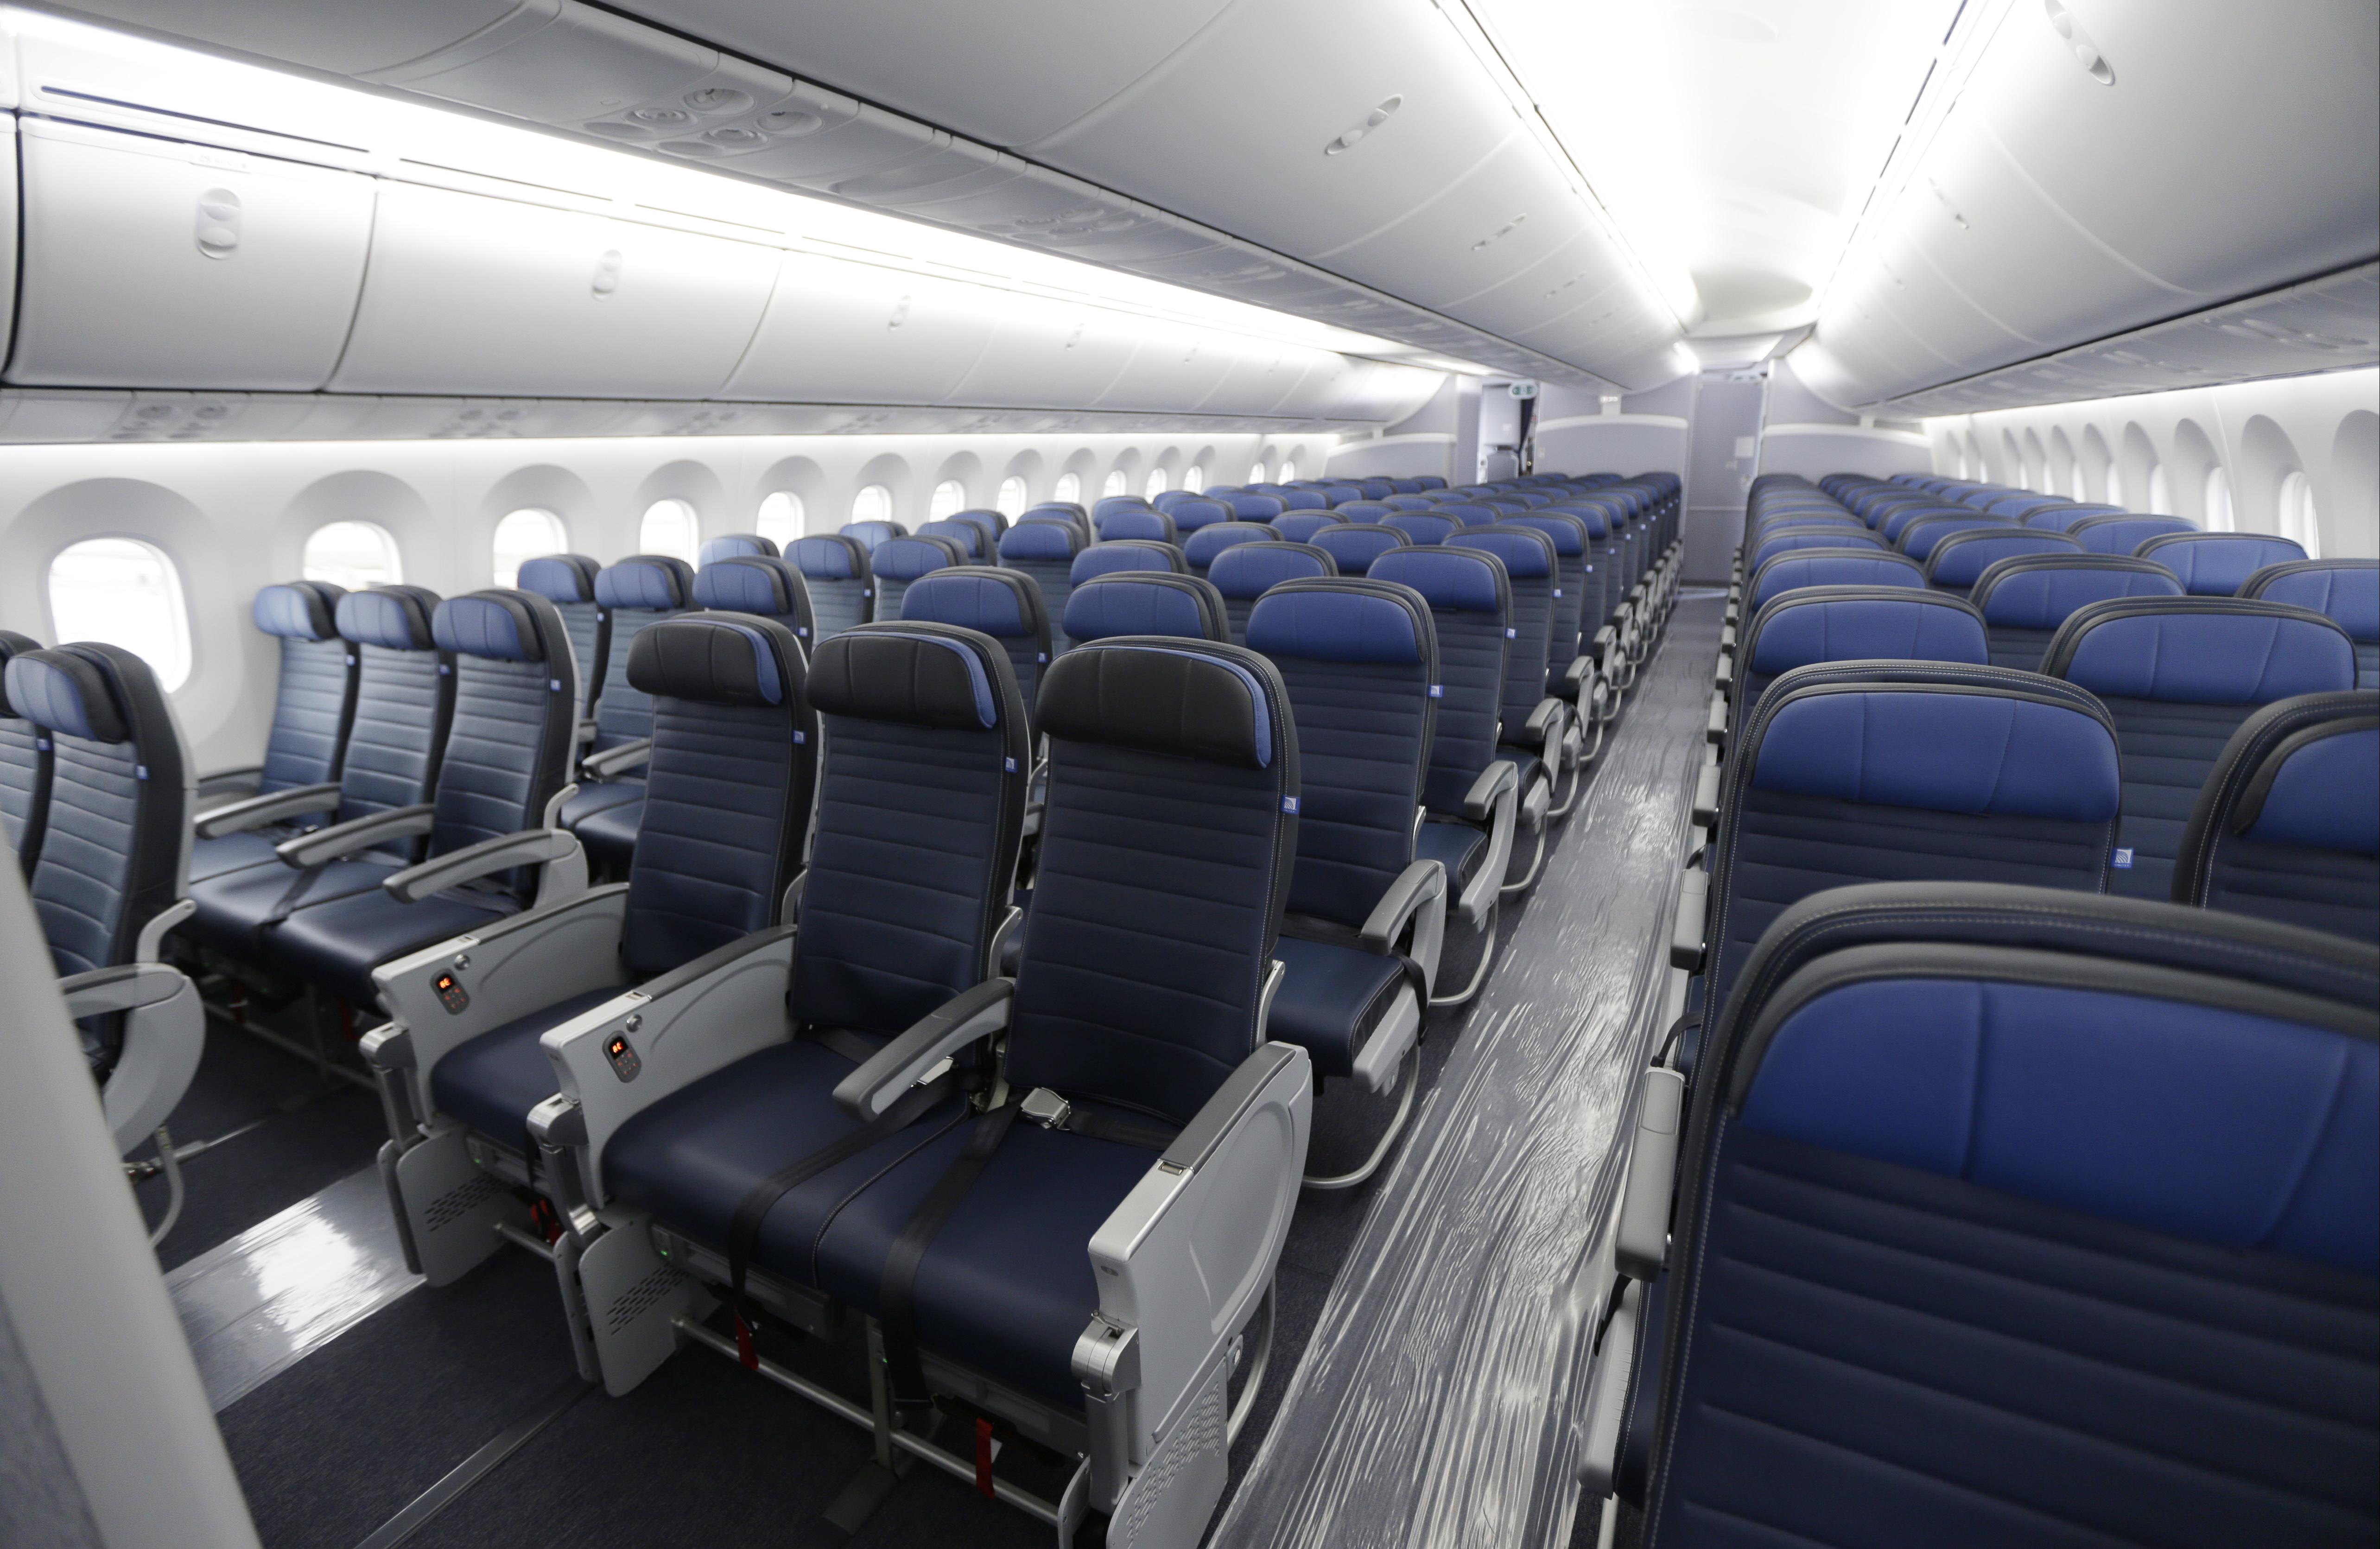 ‘incredible Shrinking Airline Seat Gets Us Court Rebuke The